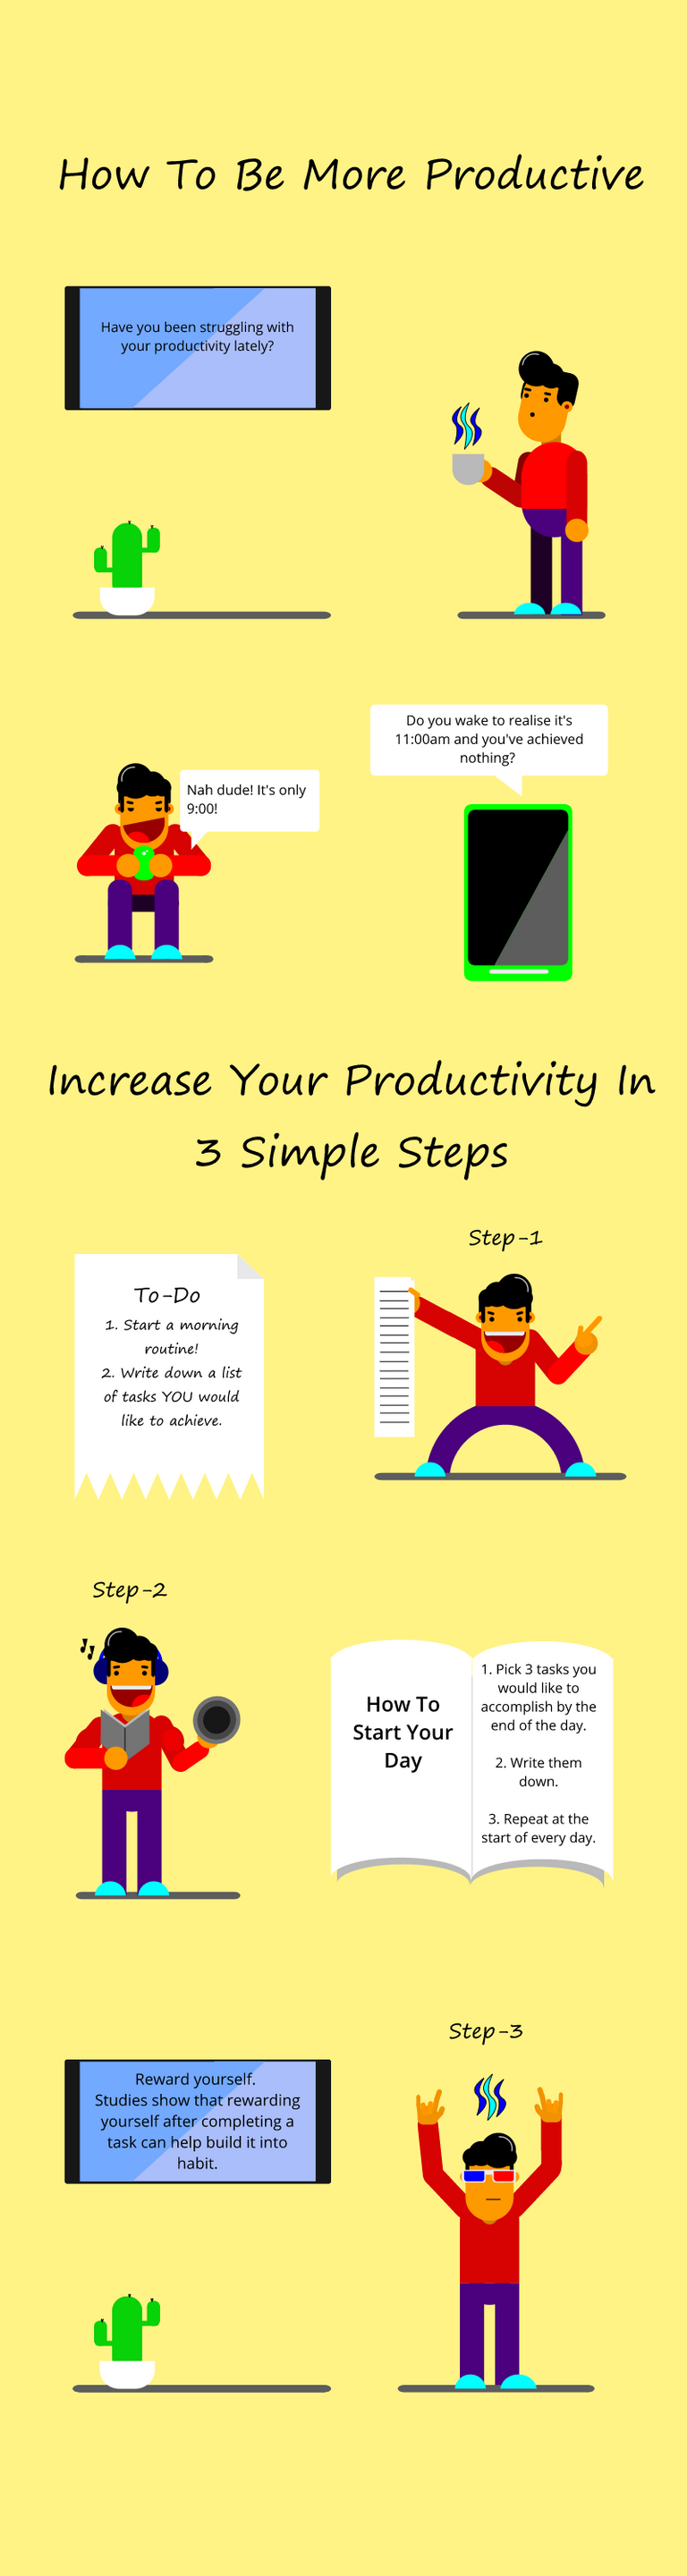 Productivity in 3 simple steps infographic.png